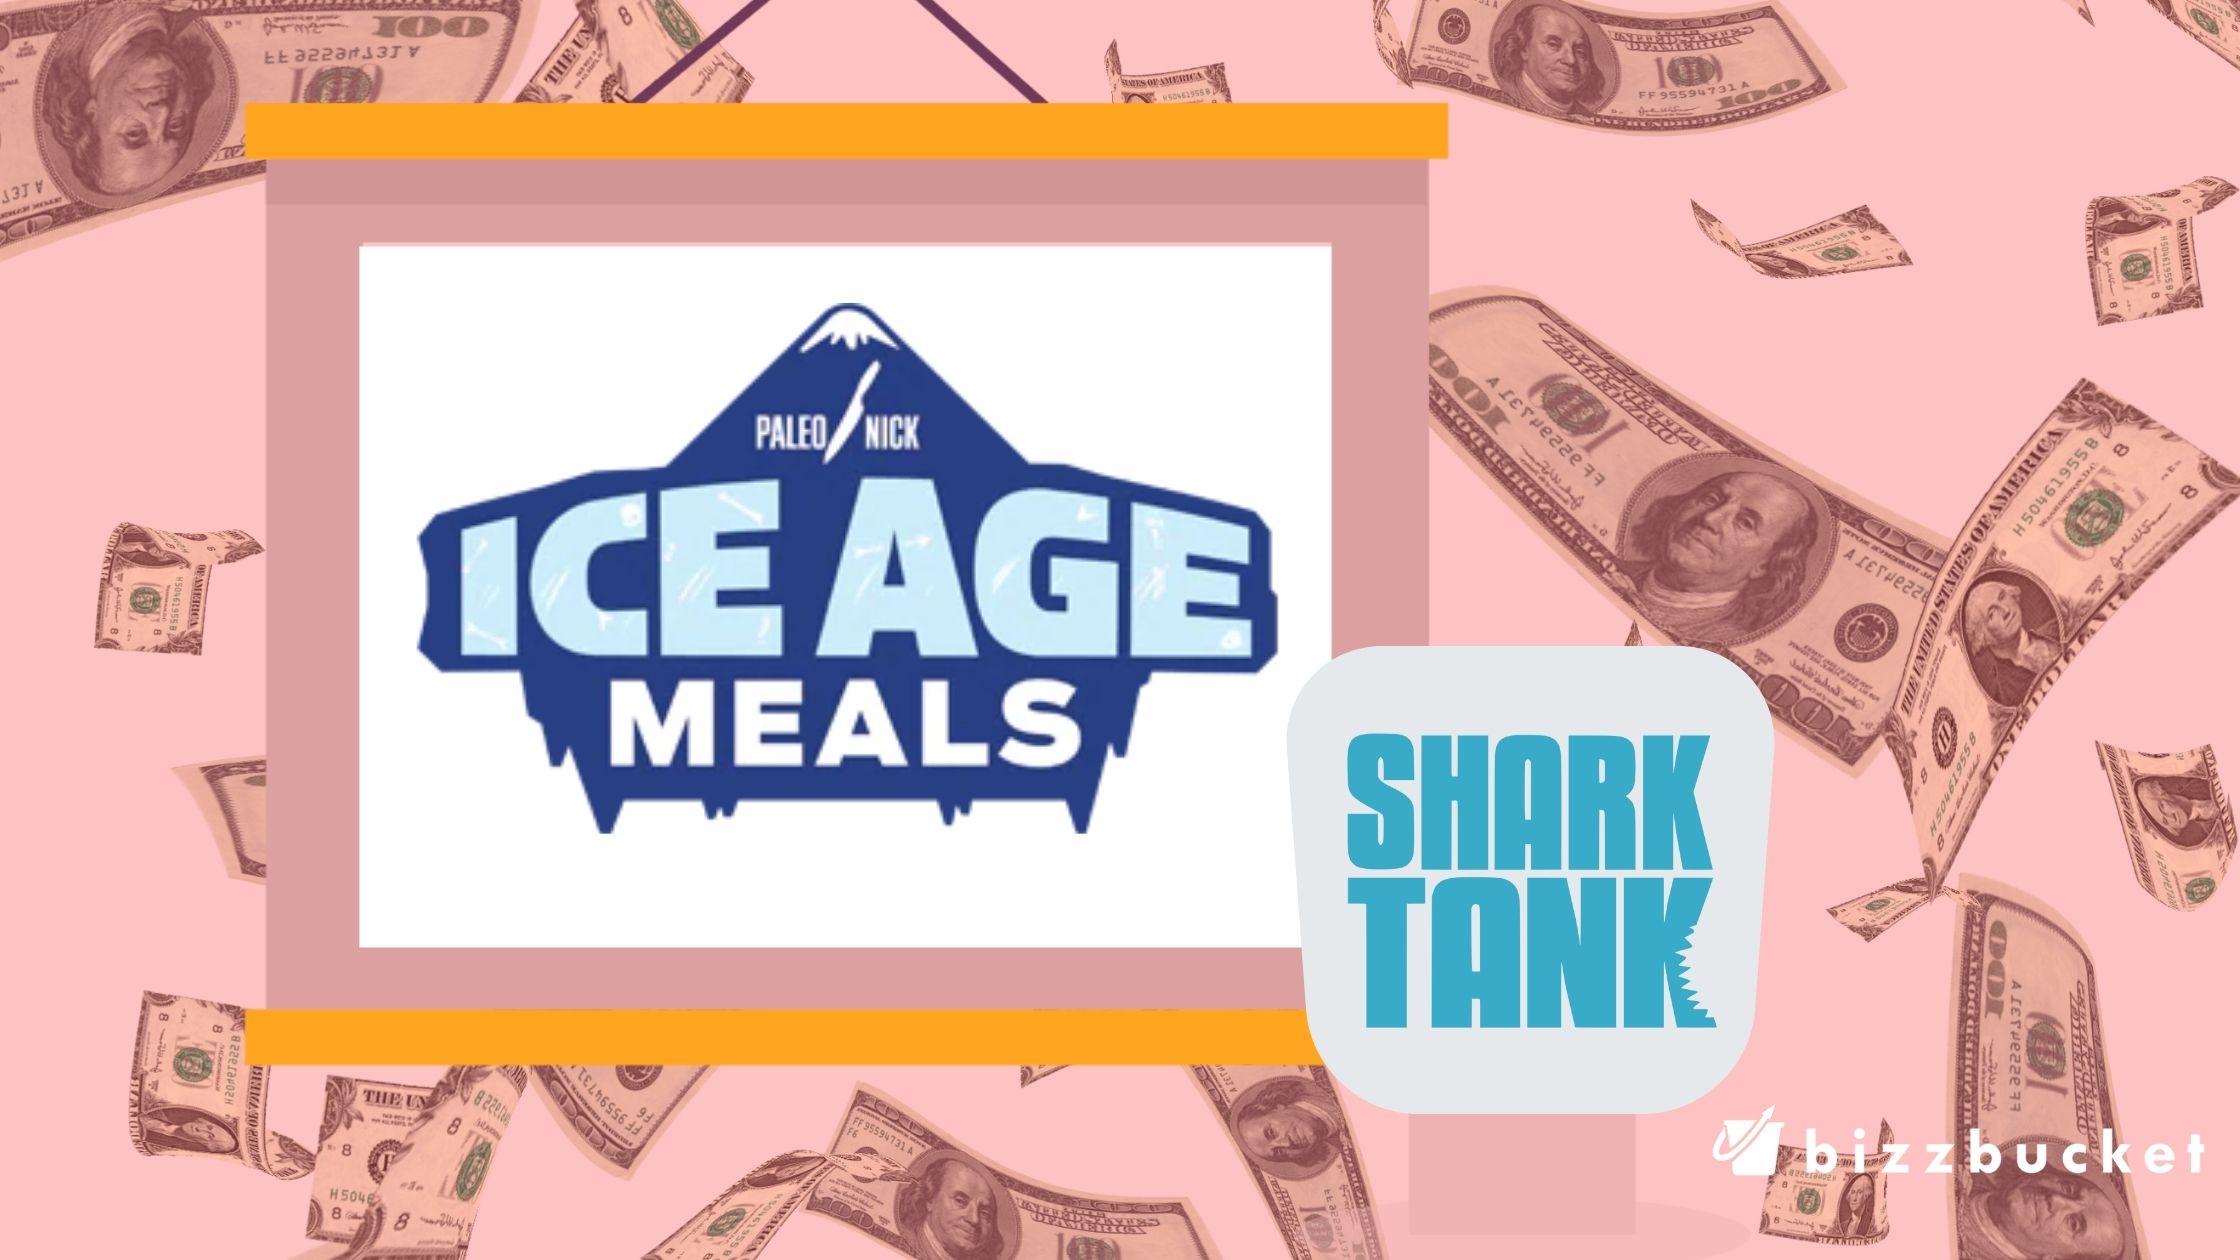 Ice Age Meals shark tank update